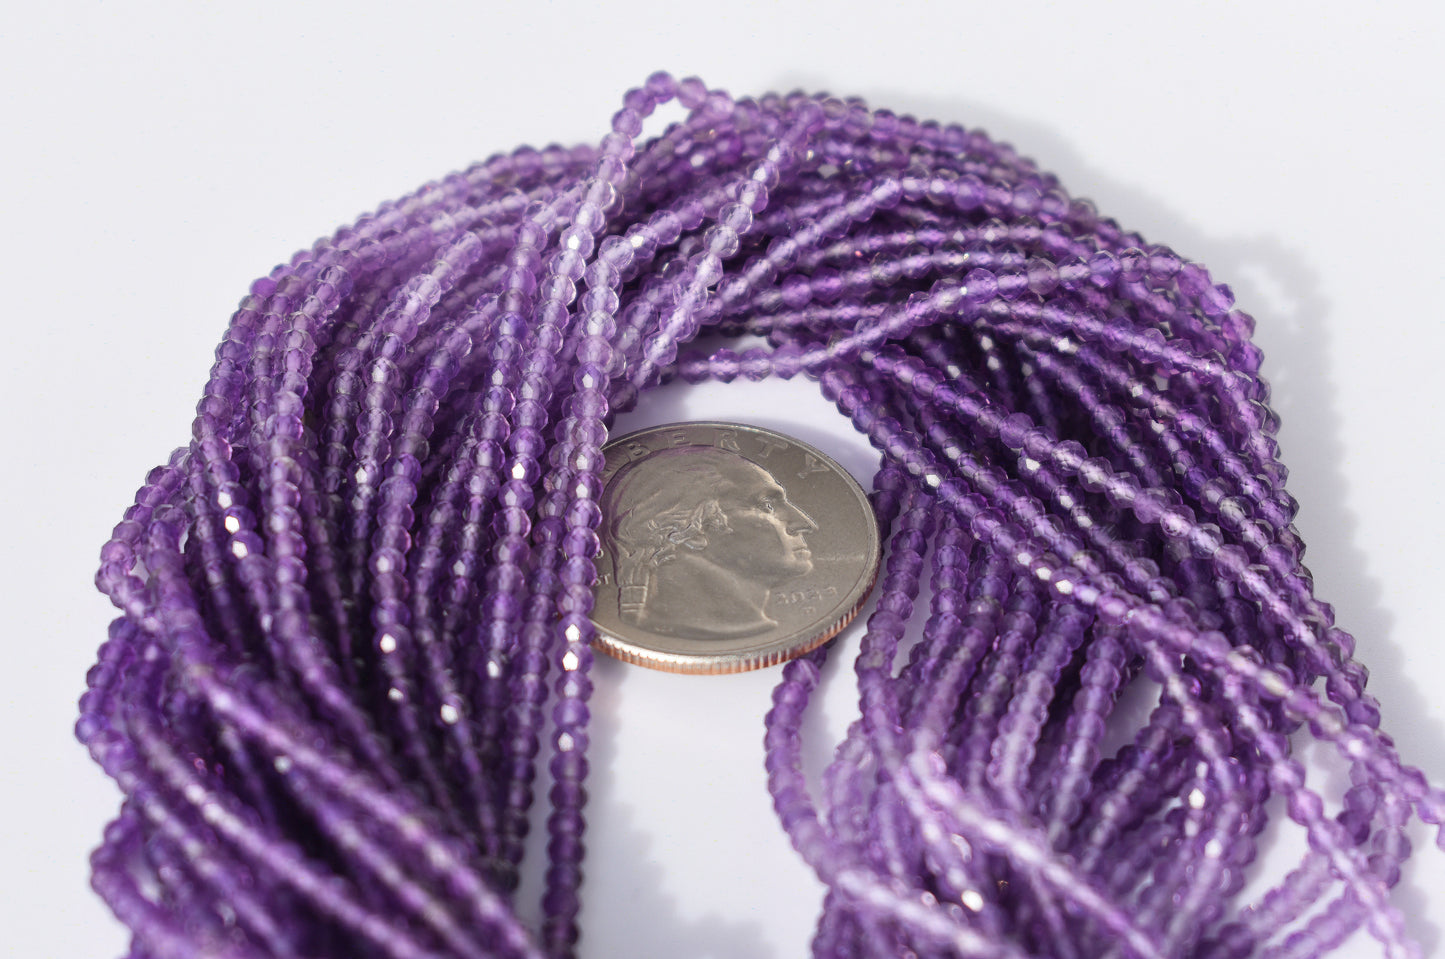 Amethyst Rondelle Faceted Beads 1.5-2mm Ombre